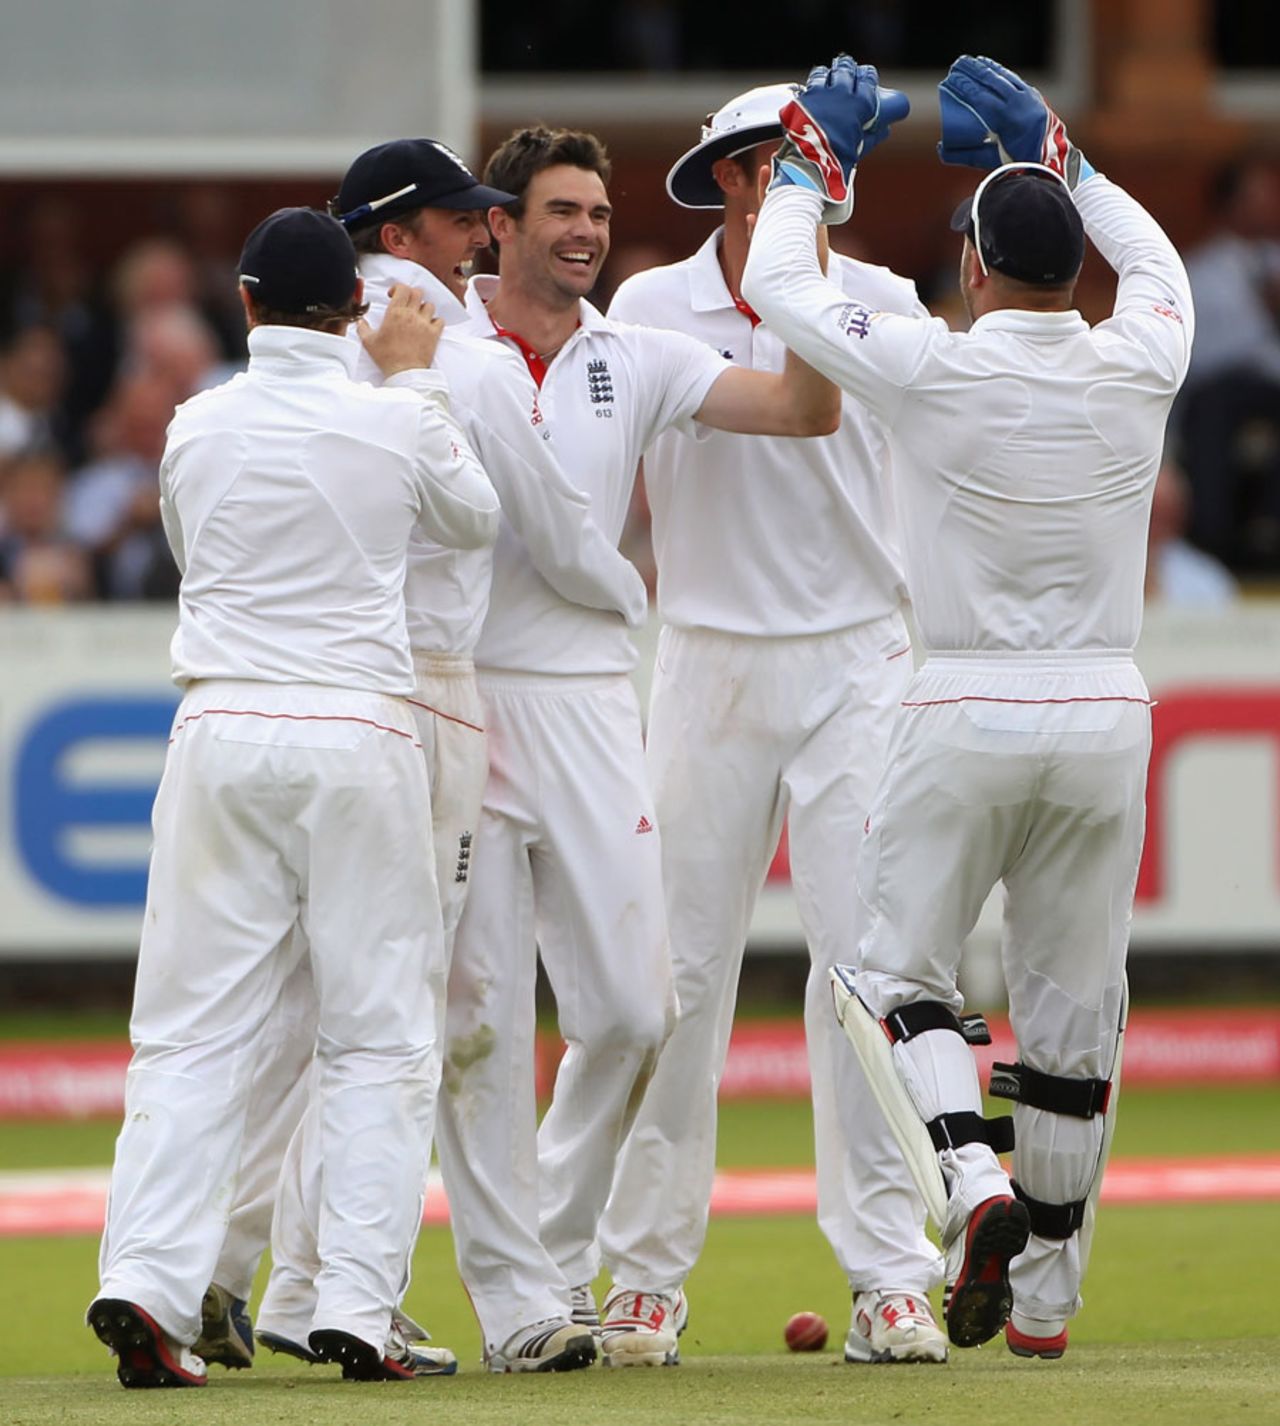 James Anderson is surrounded by team-mates after picking up his fourth wicket, England v India, 1st Test, Lord's, 5th day, July 25, 2011